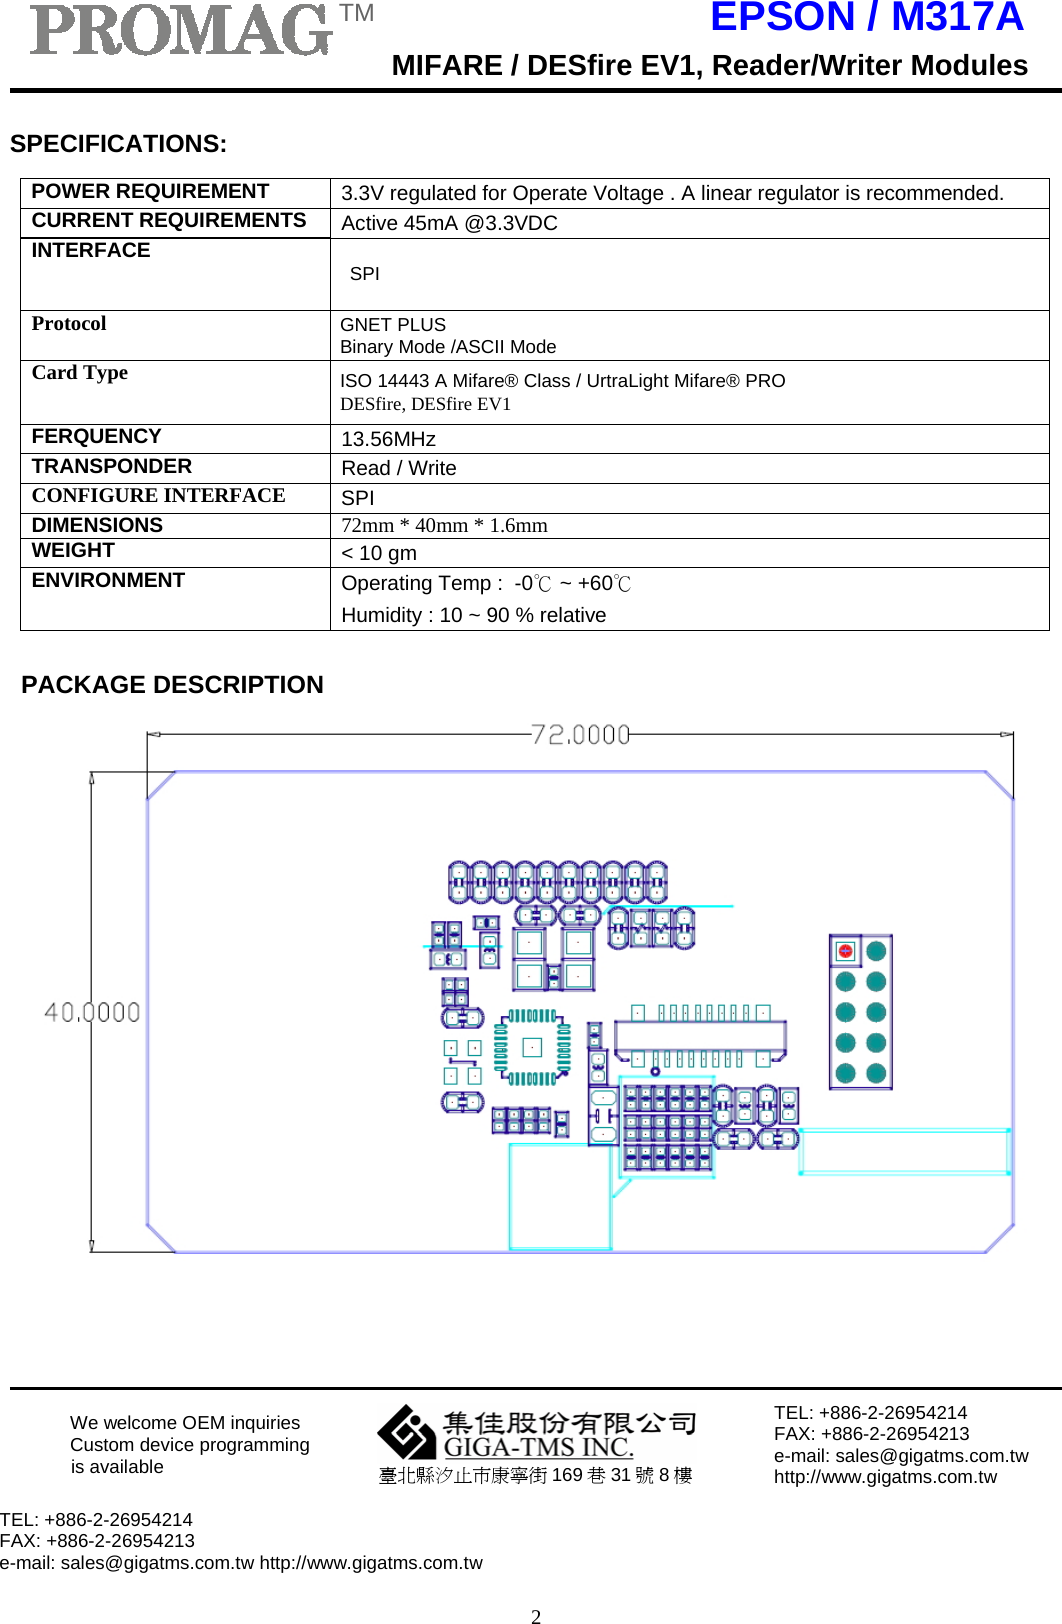 TM EPSON / M317AMIFARE / DESfire EV1, Reader/Writer Modules2    SPECIFICATIONS:  POWER REQUIREMENT 3.3V regulated for Operate Voltage . A linear regulator is recommended.CURRENT REQUIREMENTS Active 45mA @3.3VDCINTERFACE SPI Protocol GNET PLUS Binary Mode /ASCII Mode Card Type ISO 14443 A Mifare® Class / UrtraLight Mifare® PRO DESfire, DESfire EV1 FERQUENCY 13.56MHzTRANSPONDER Read / WriteCONFIGURE INTERFACE SPI DIMENSIONS 72mm * 40mm * 1.6mmWEIGHT &lt; 10 gm ENVIRONMENT Operating Temp :  -0℃ ~ +60℃ Humidity : 10 ~ 90 % relative   PACKAGE DESCRIPTION         We welcome OEM inquiries  Custom device programming is available  臺北縣汐止市康寧街 169 巷 31 號 8 樓 TEL: +886-2-26954214 FAX: +886-2-26954213 e-mail: sales@gigatms.com.tw http://www.gigatms.com.tw  TEL: +886-2-26954214 FAX: +886-2-26954213 e-mail: sales@gigatms.com.tw http://www.gigatms.com.tw       